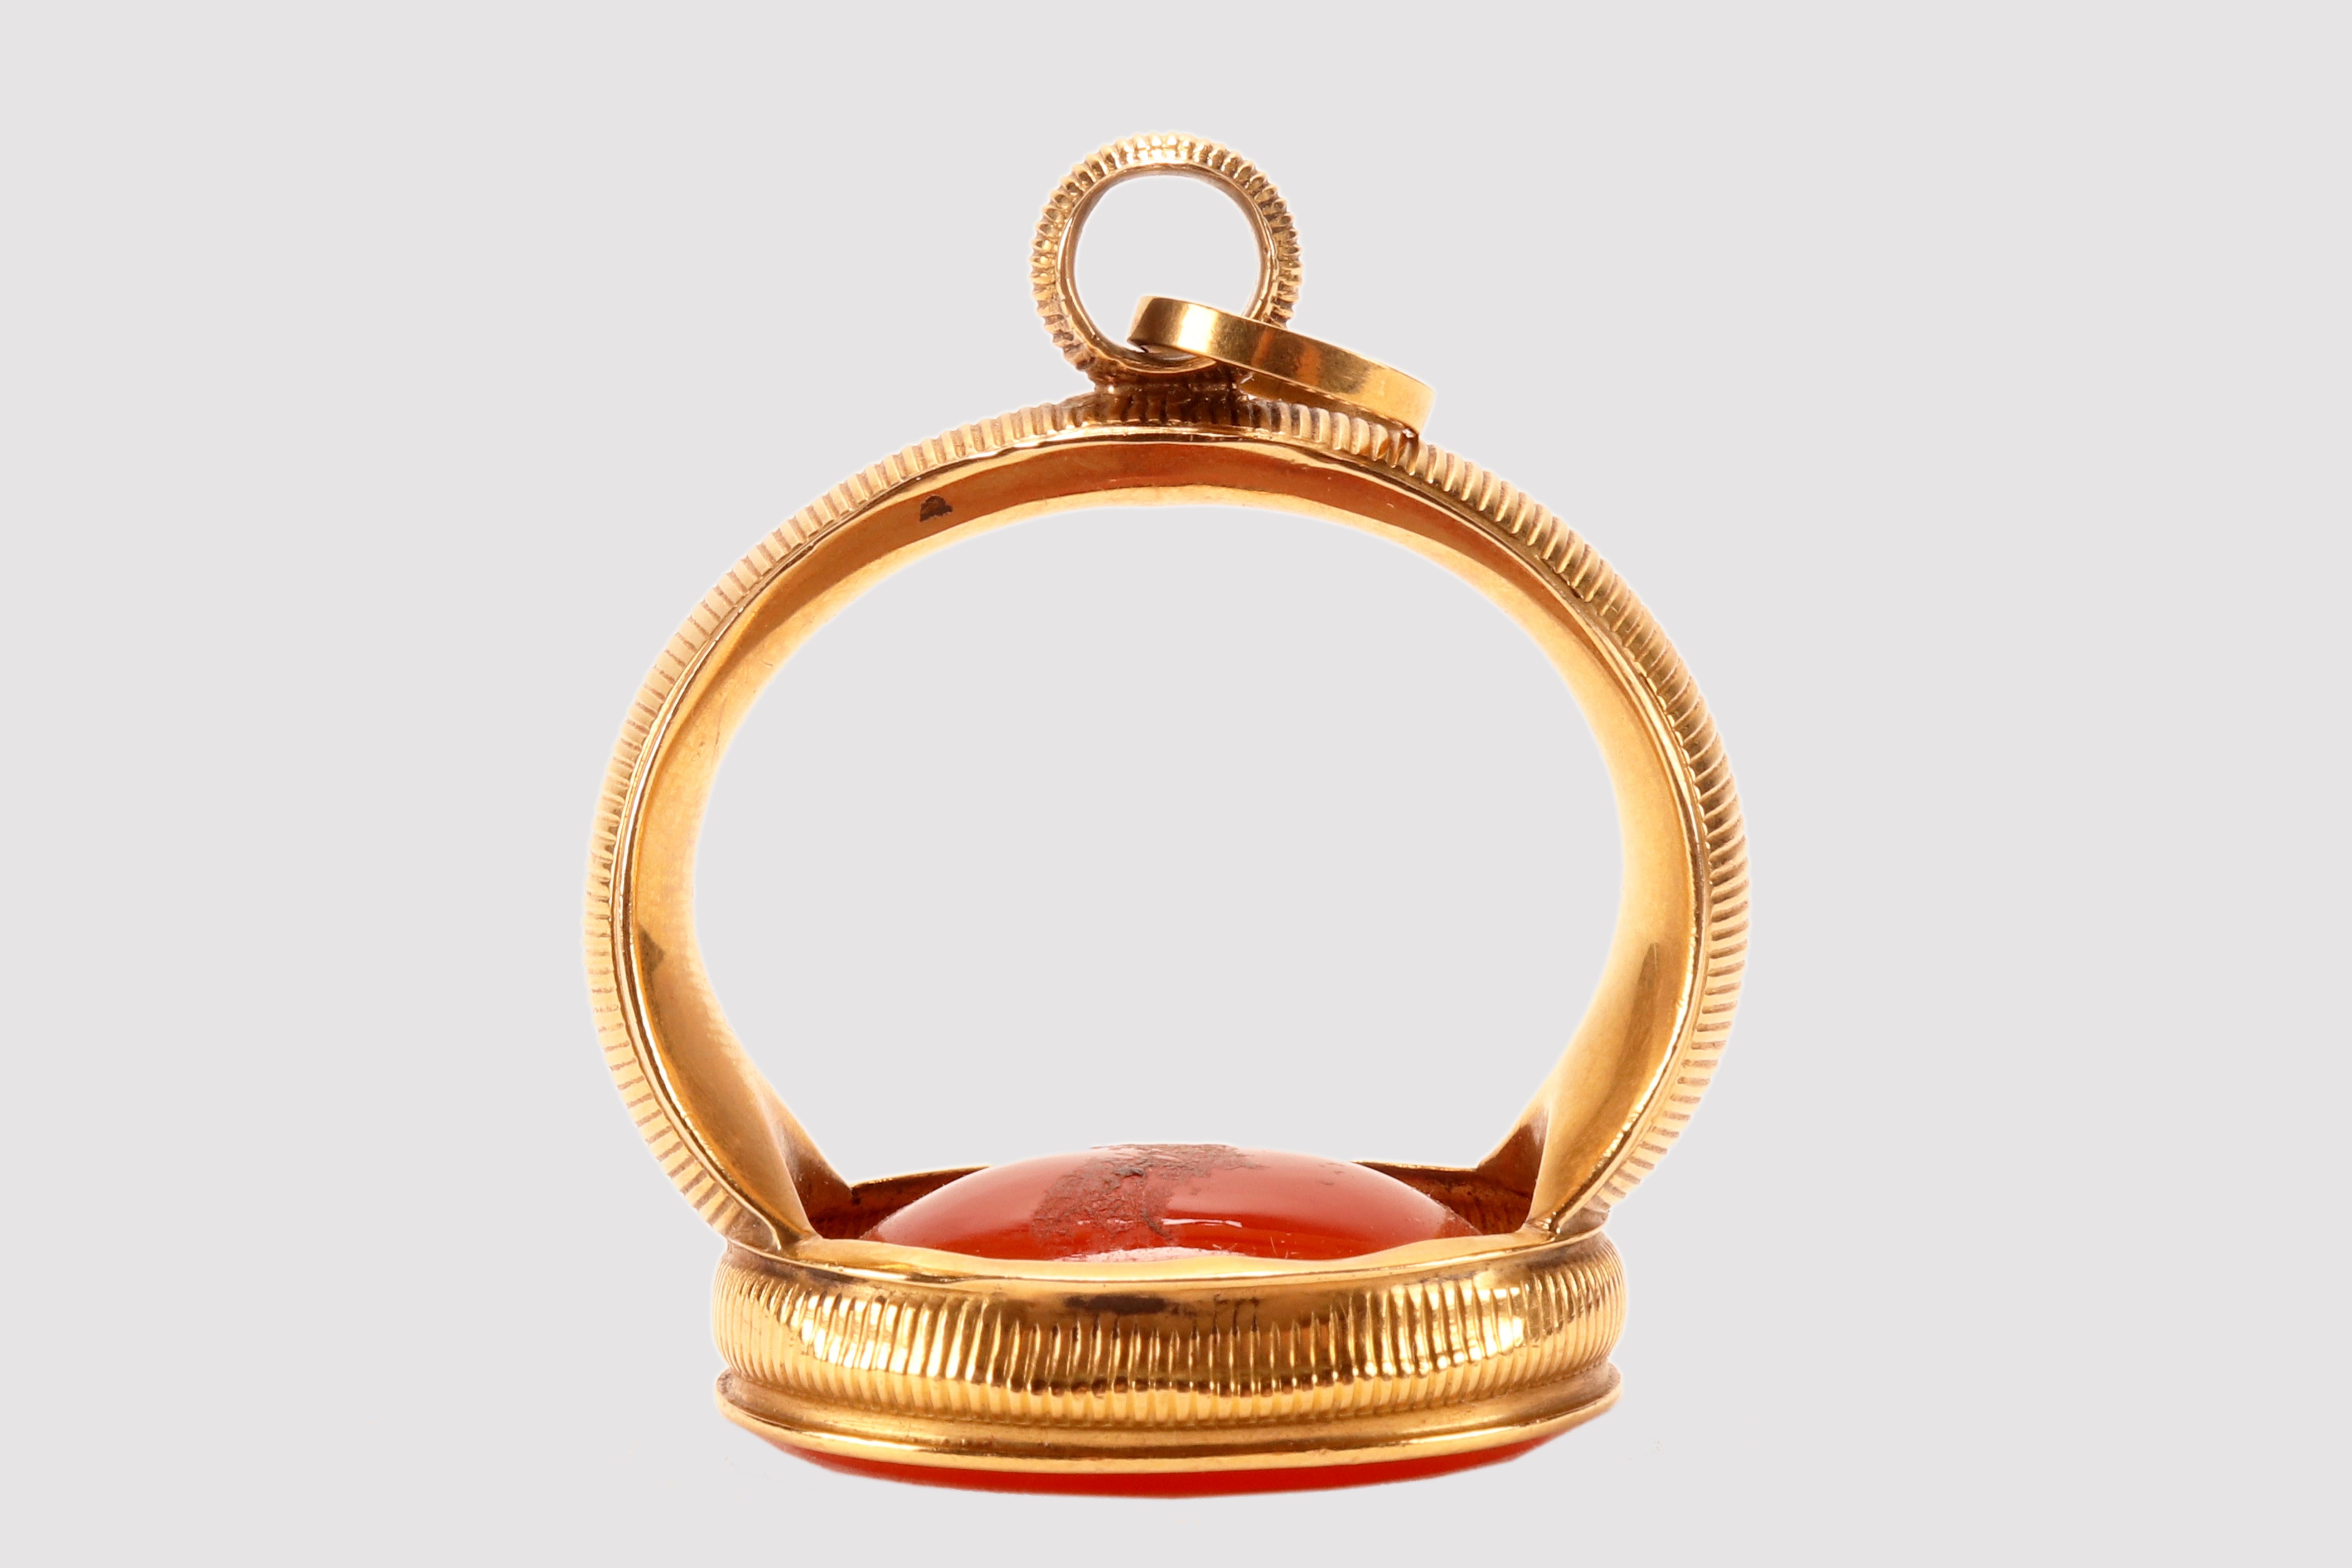 Antique 18 Kt. gold and carnelian chain seal. The matrix is never engraved carnelian, oval in shape with beveled edges. The back of the carnelian appears convex. A flat gold band embraces the carnelian edge rising like a band geometrically decorated